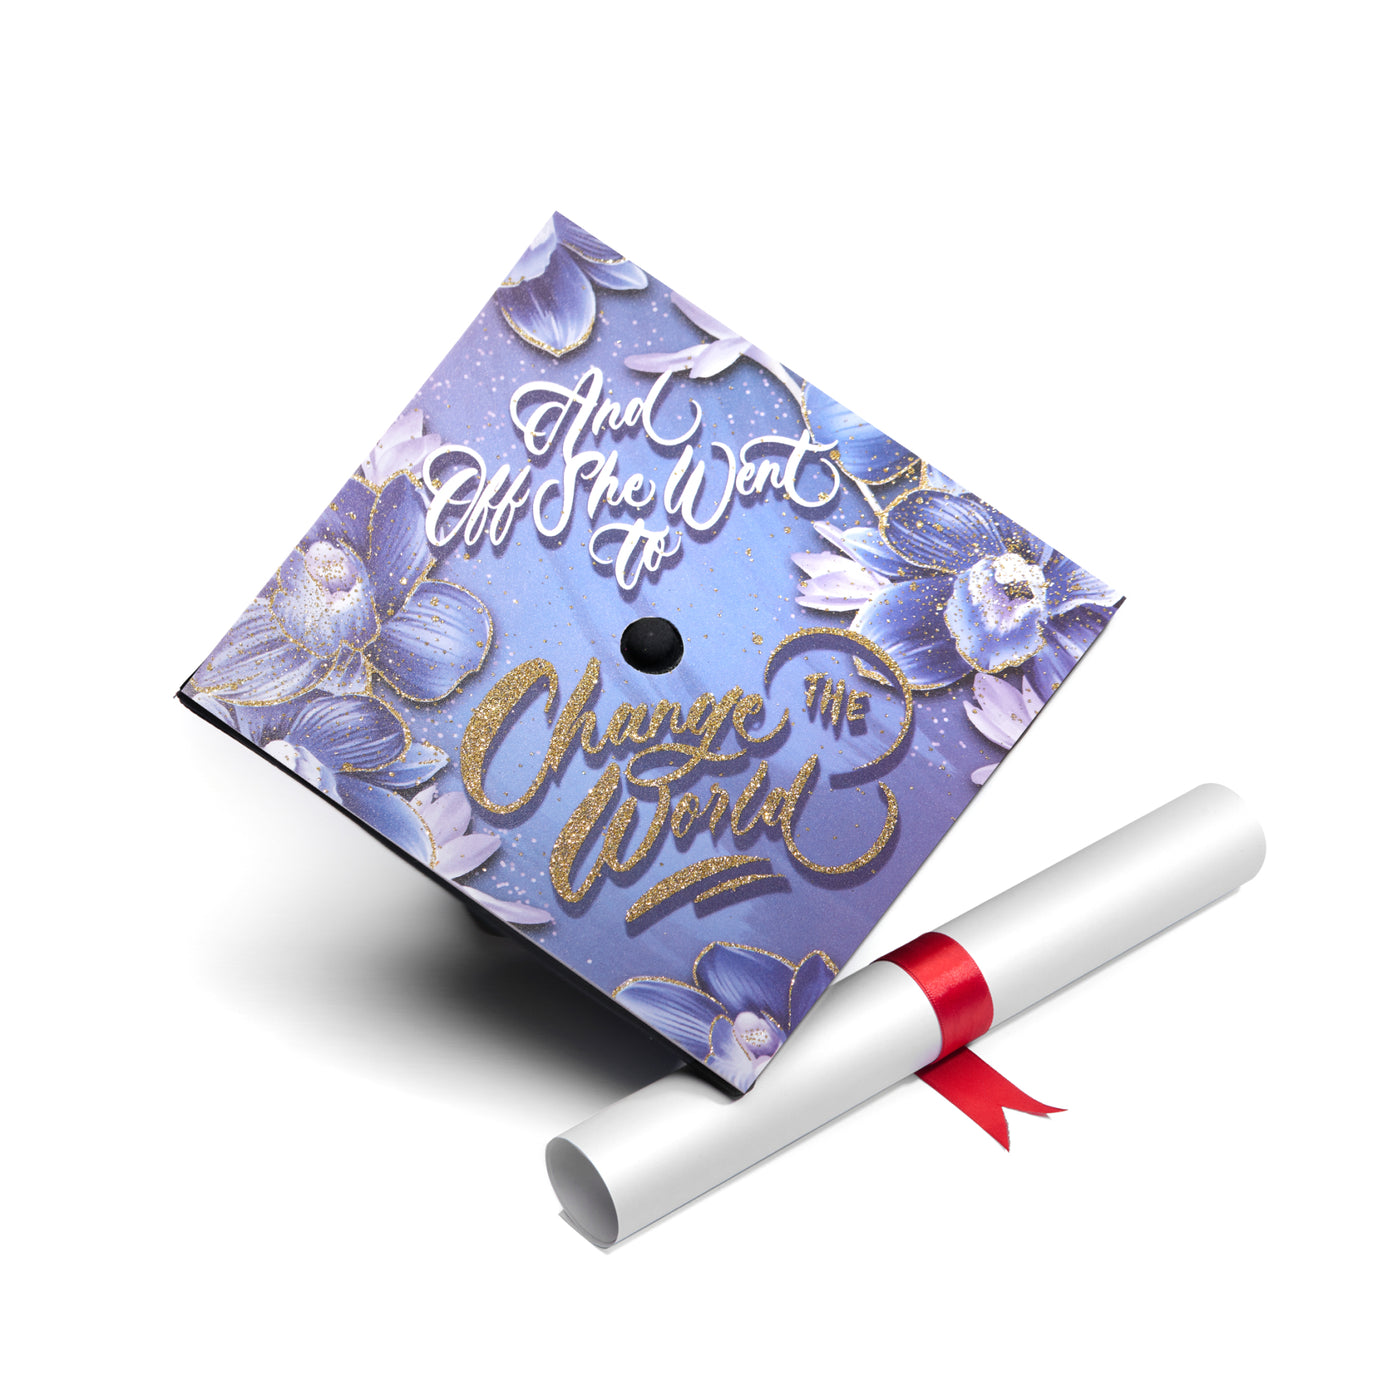 Graduation cap topper art print, And off she went to change the world